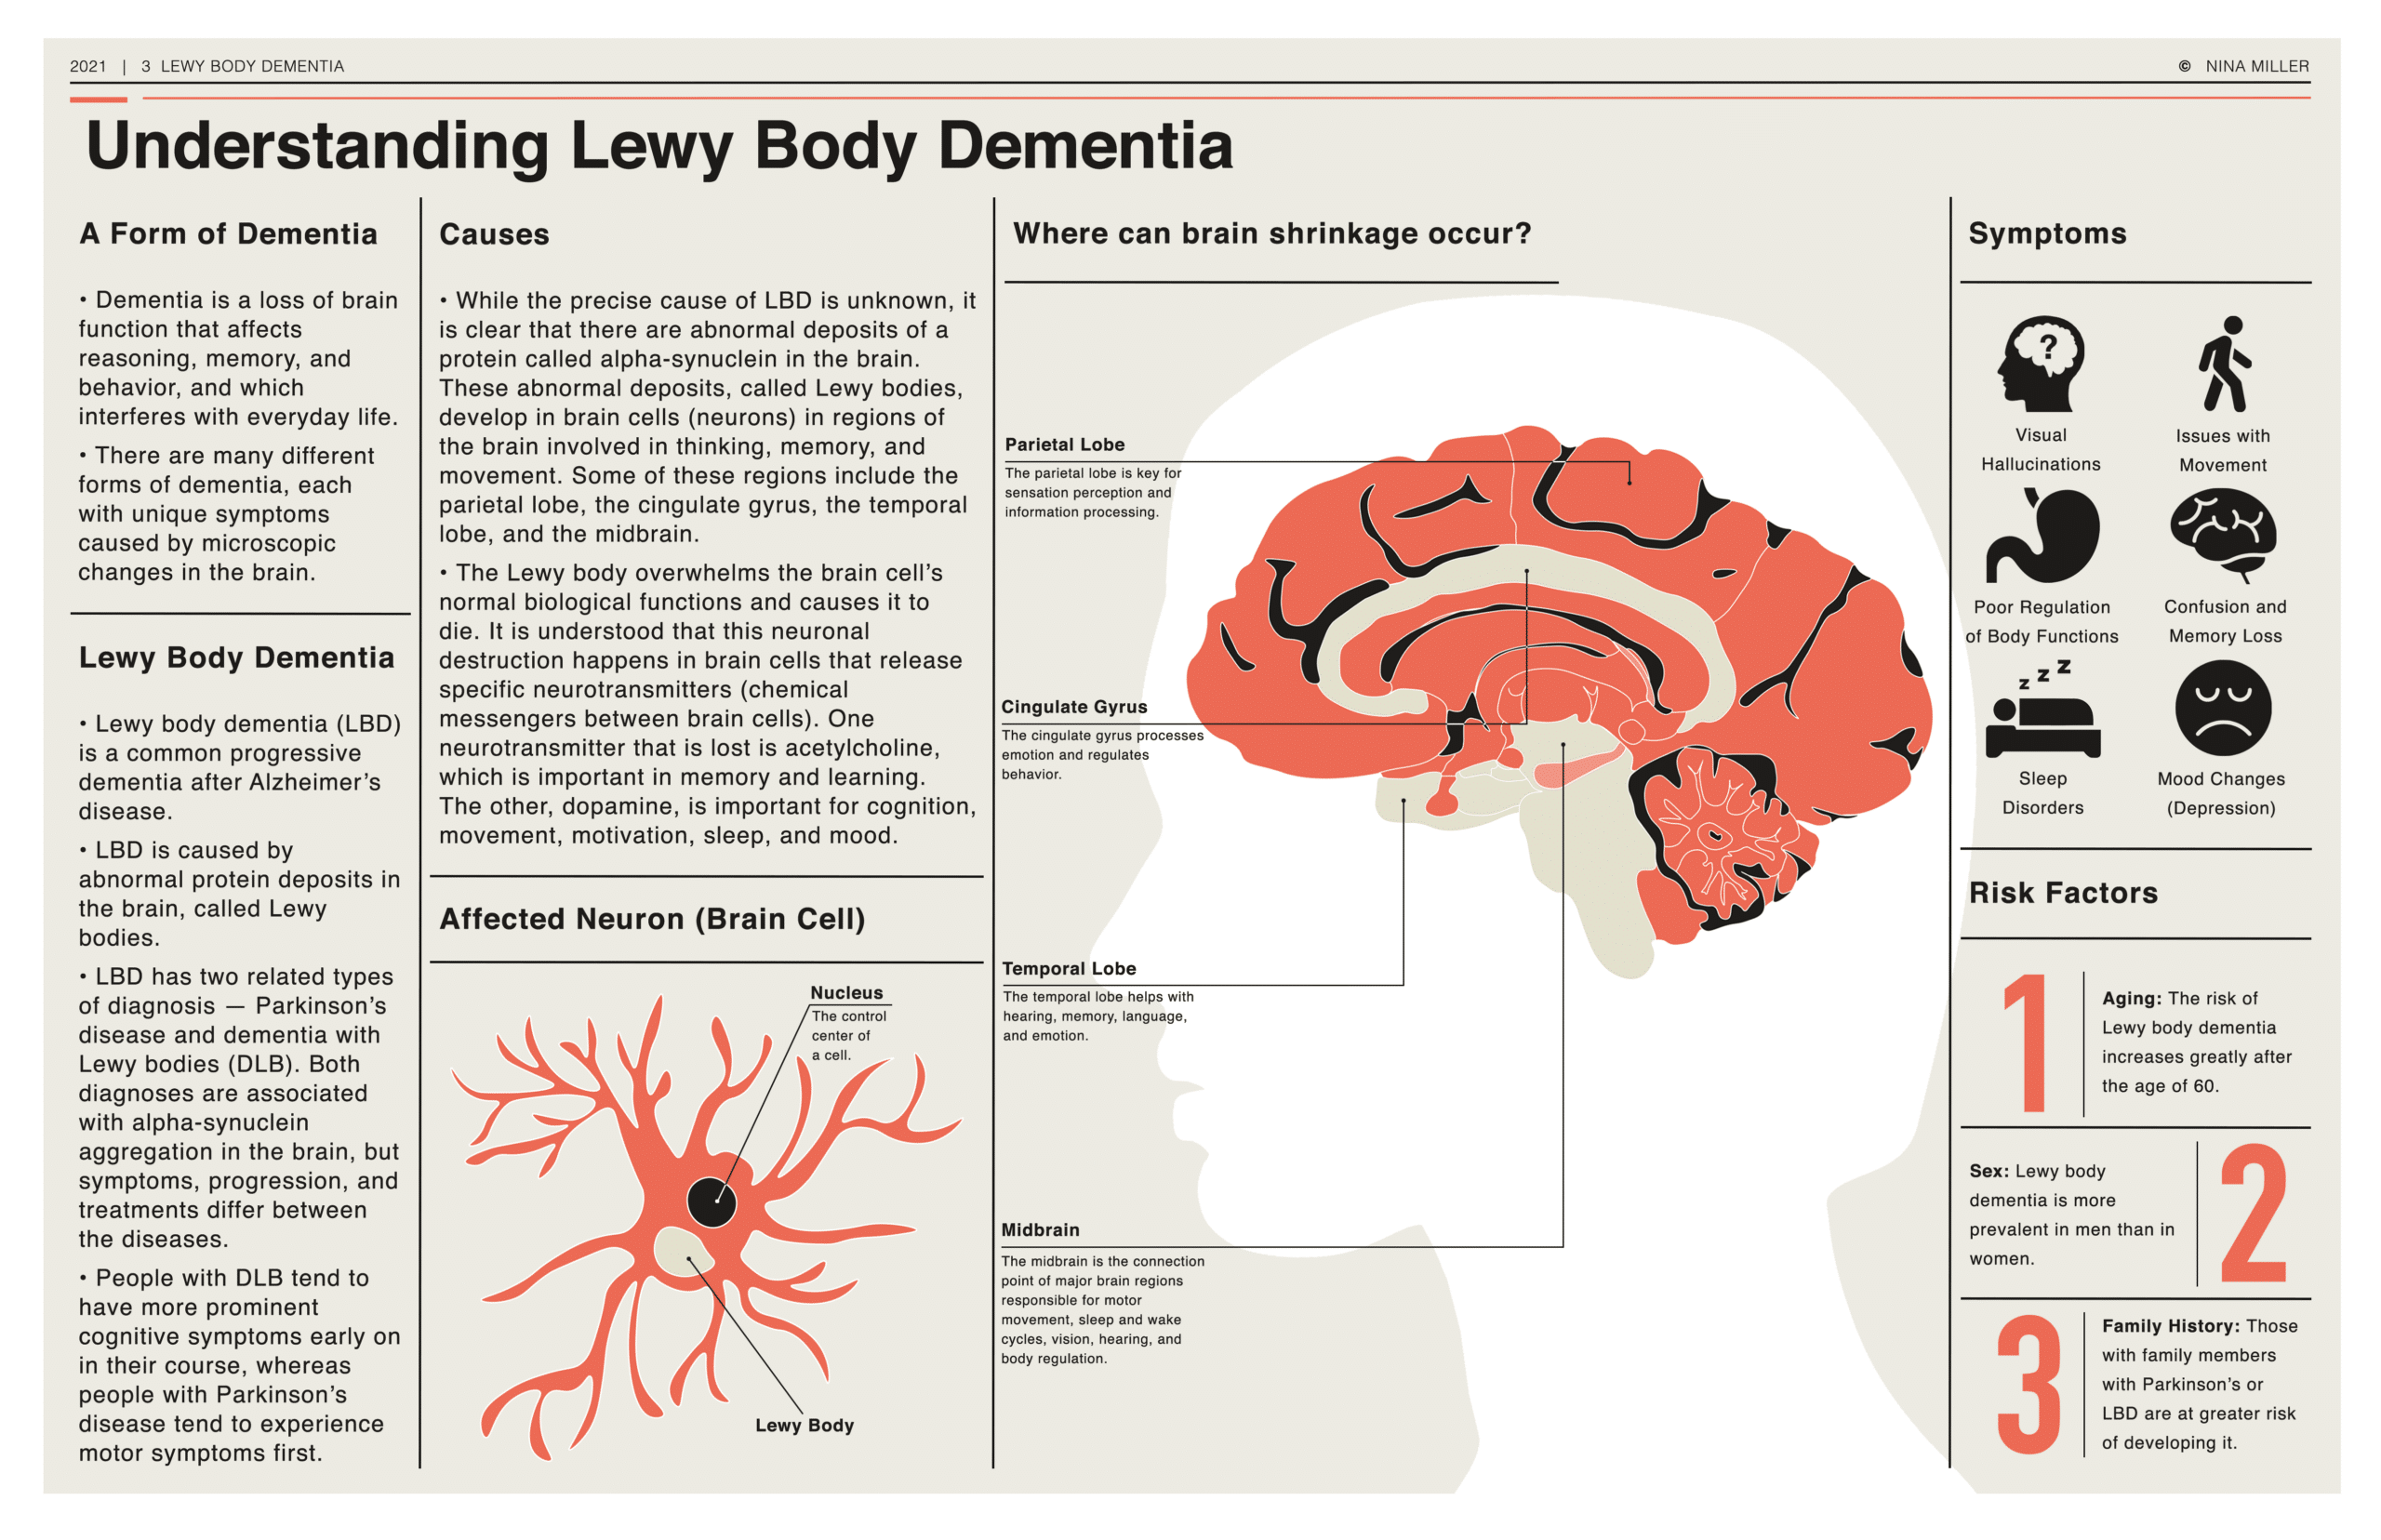 latest research on lewy body dementia